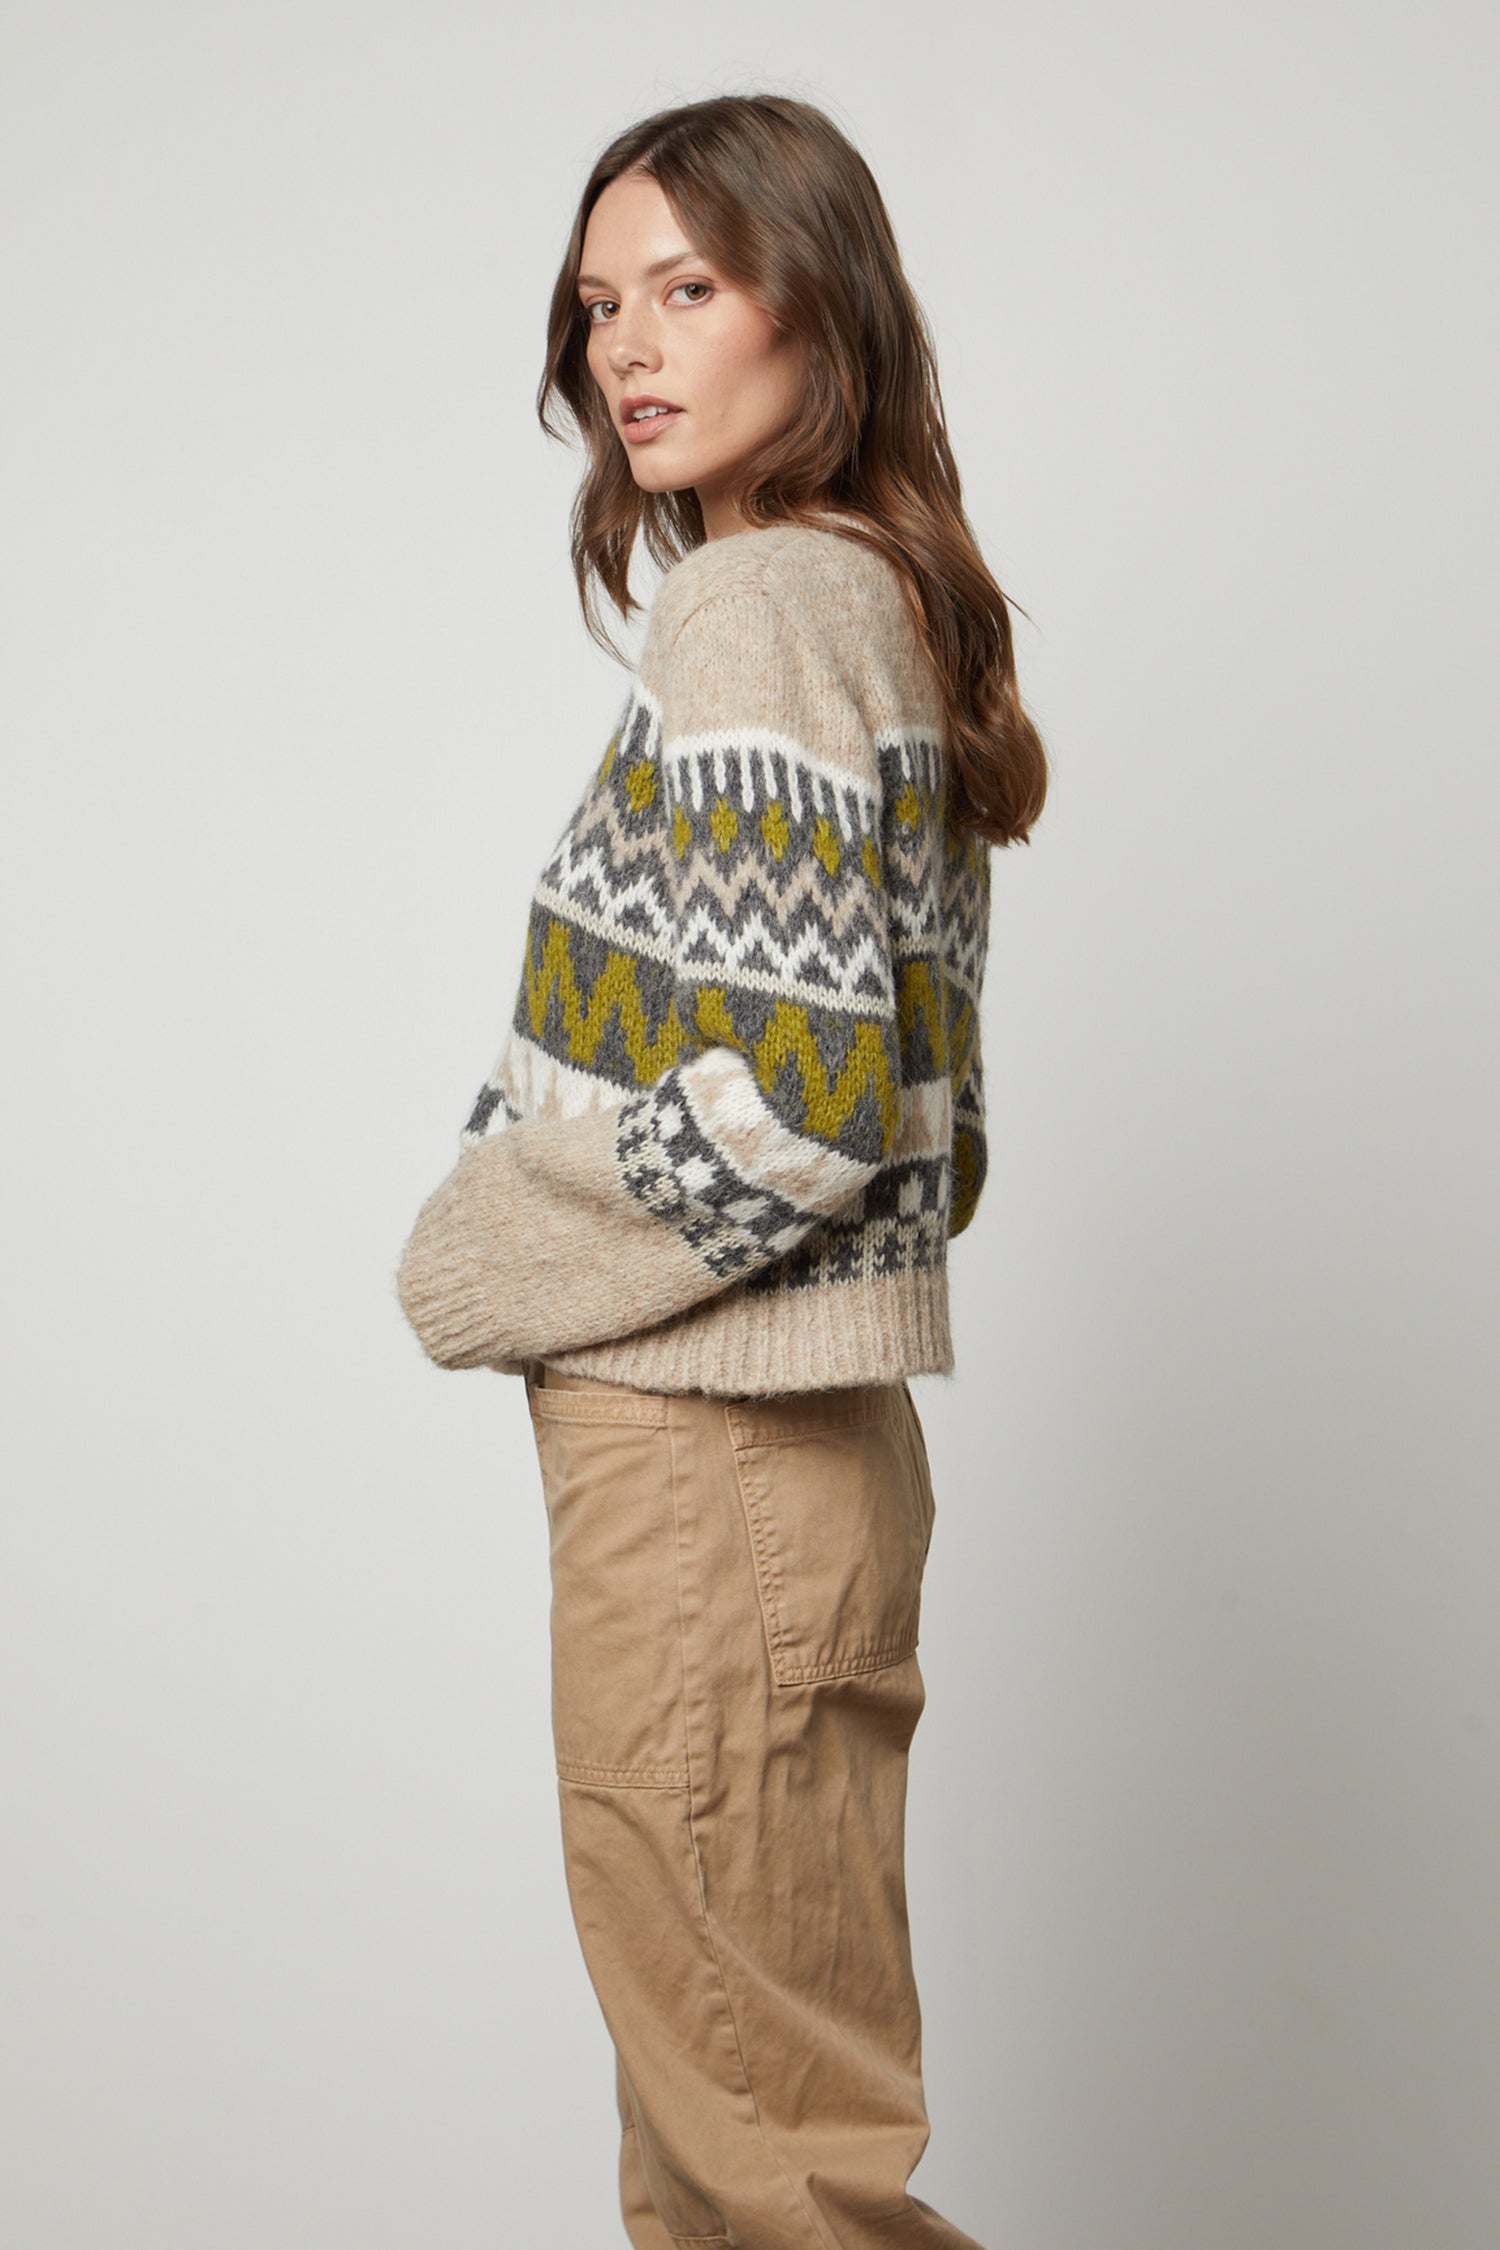   A cozy model wearing a MAKENZIE ALPACA CABLE KNIT CREW NECK SWEATER by Velvet by Graham & Spencer and khaki pants. 